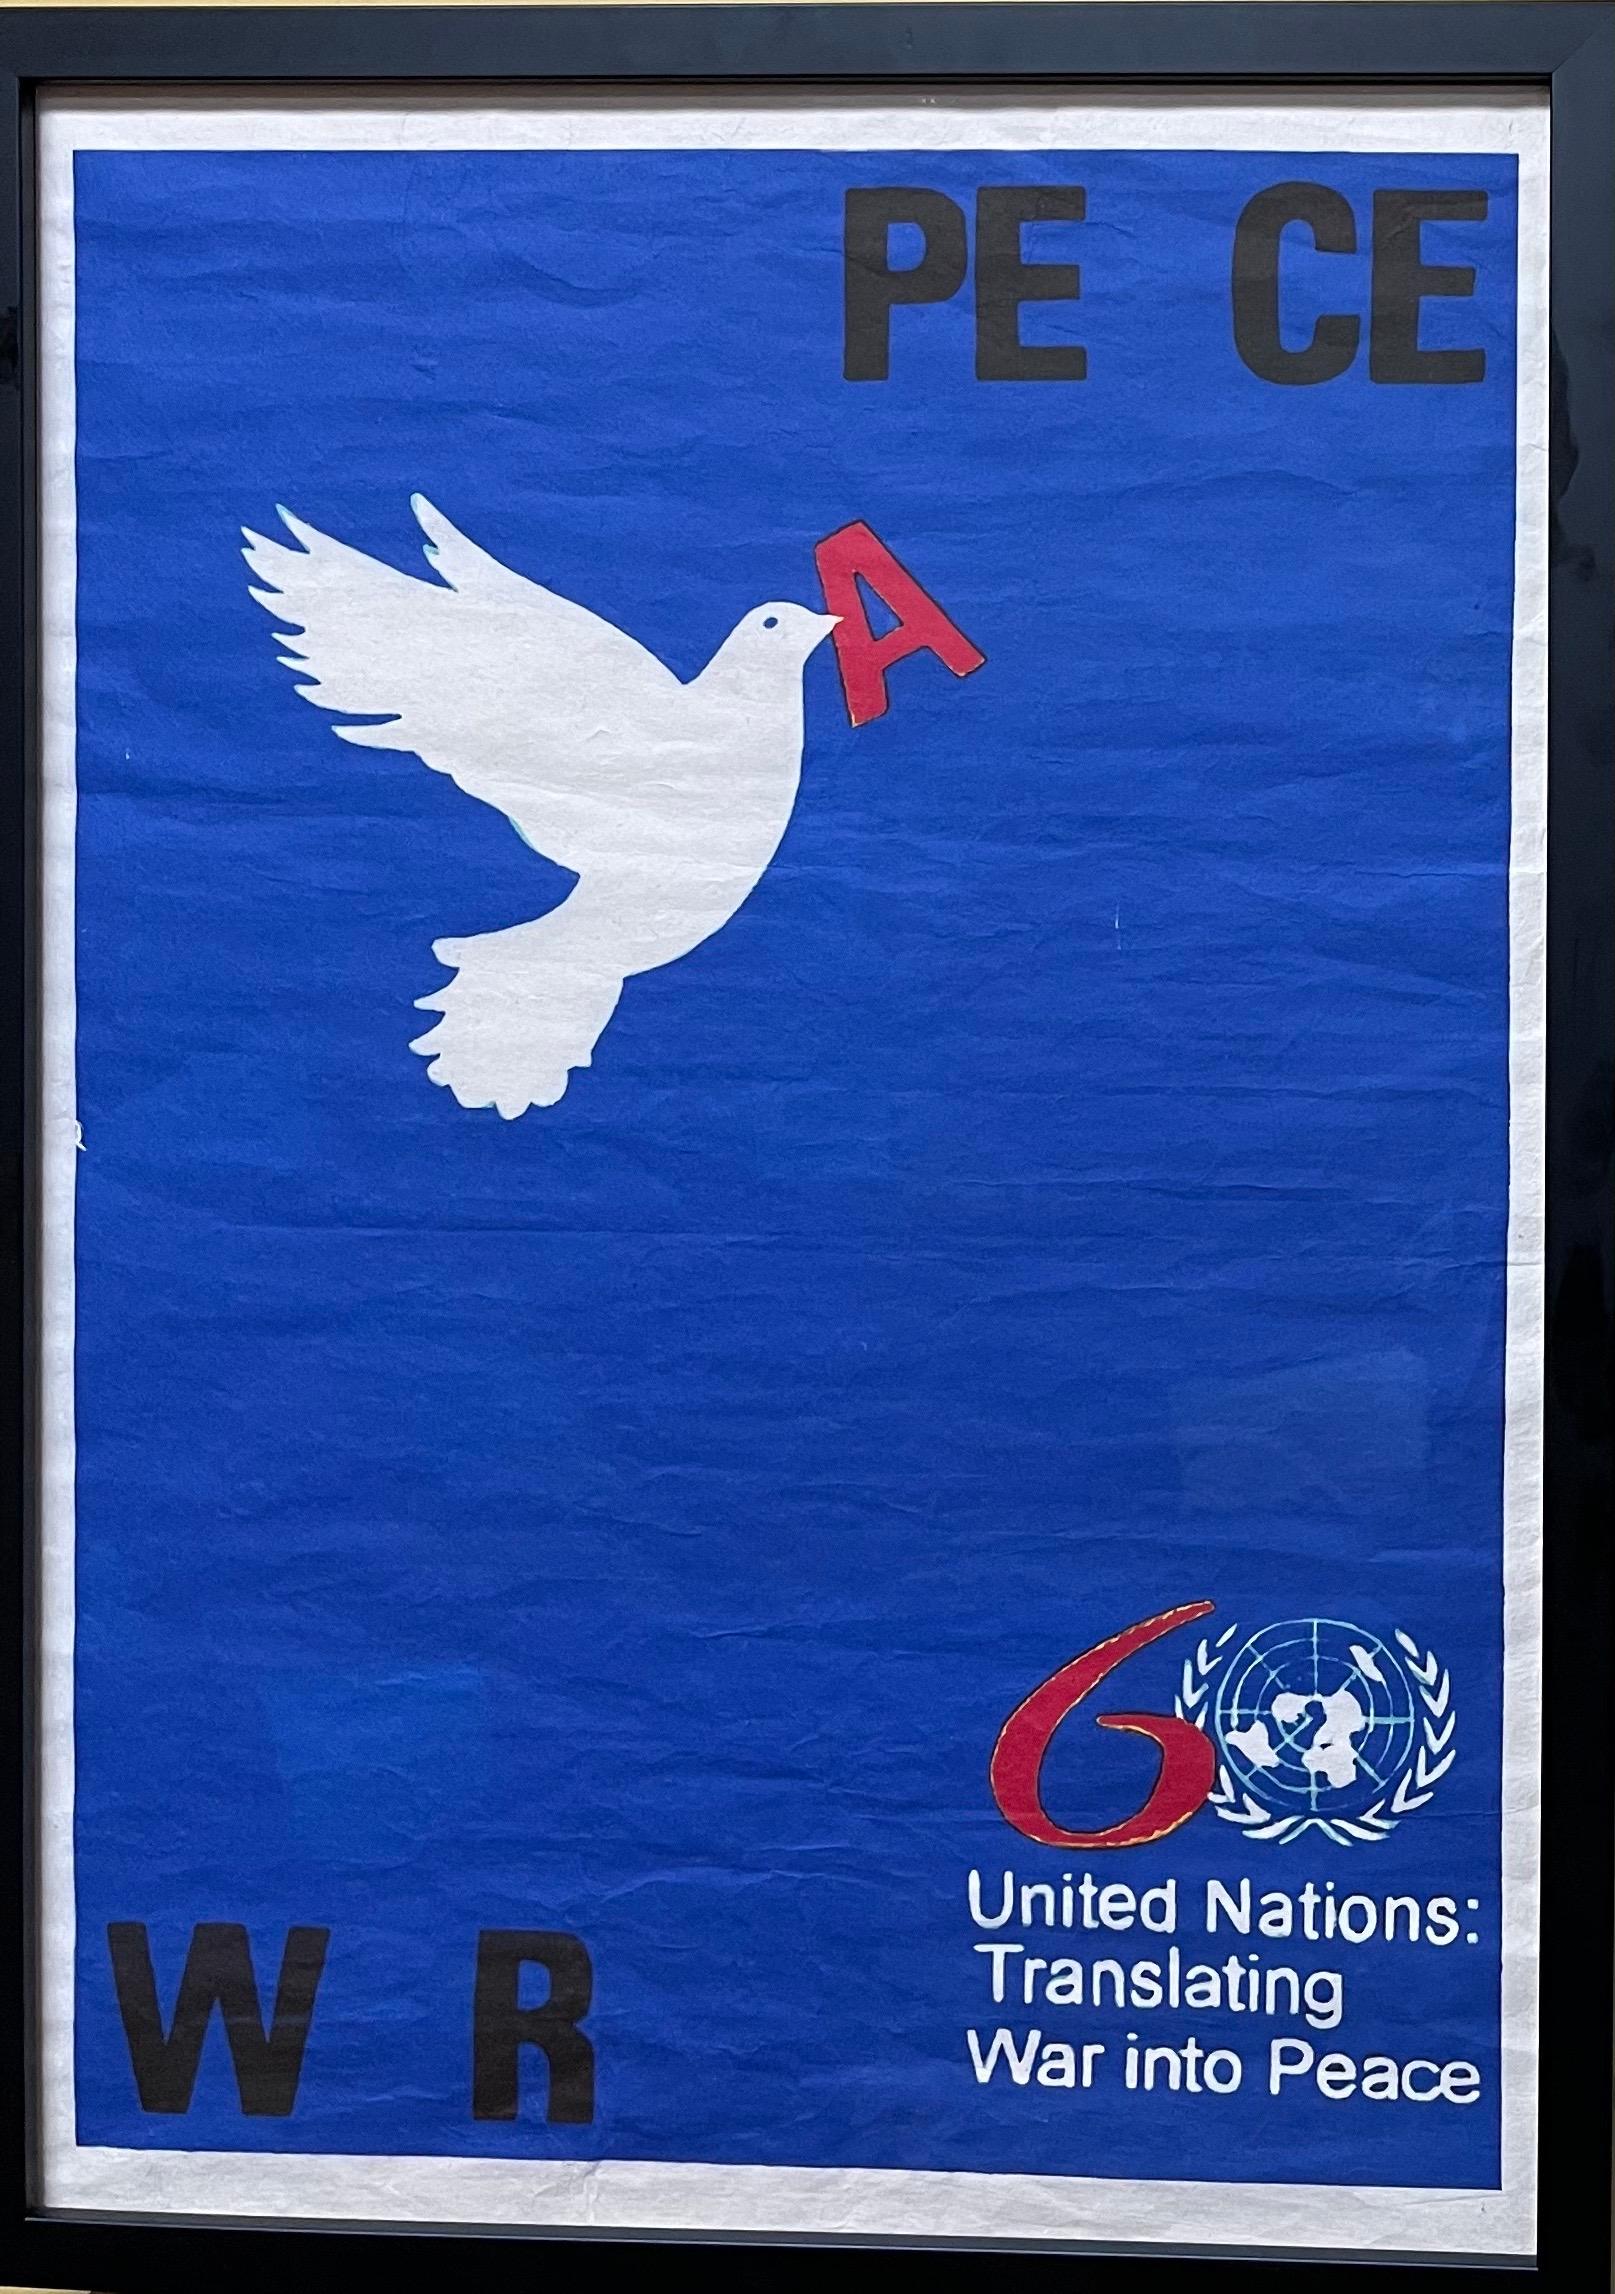 united nations translating war into peace